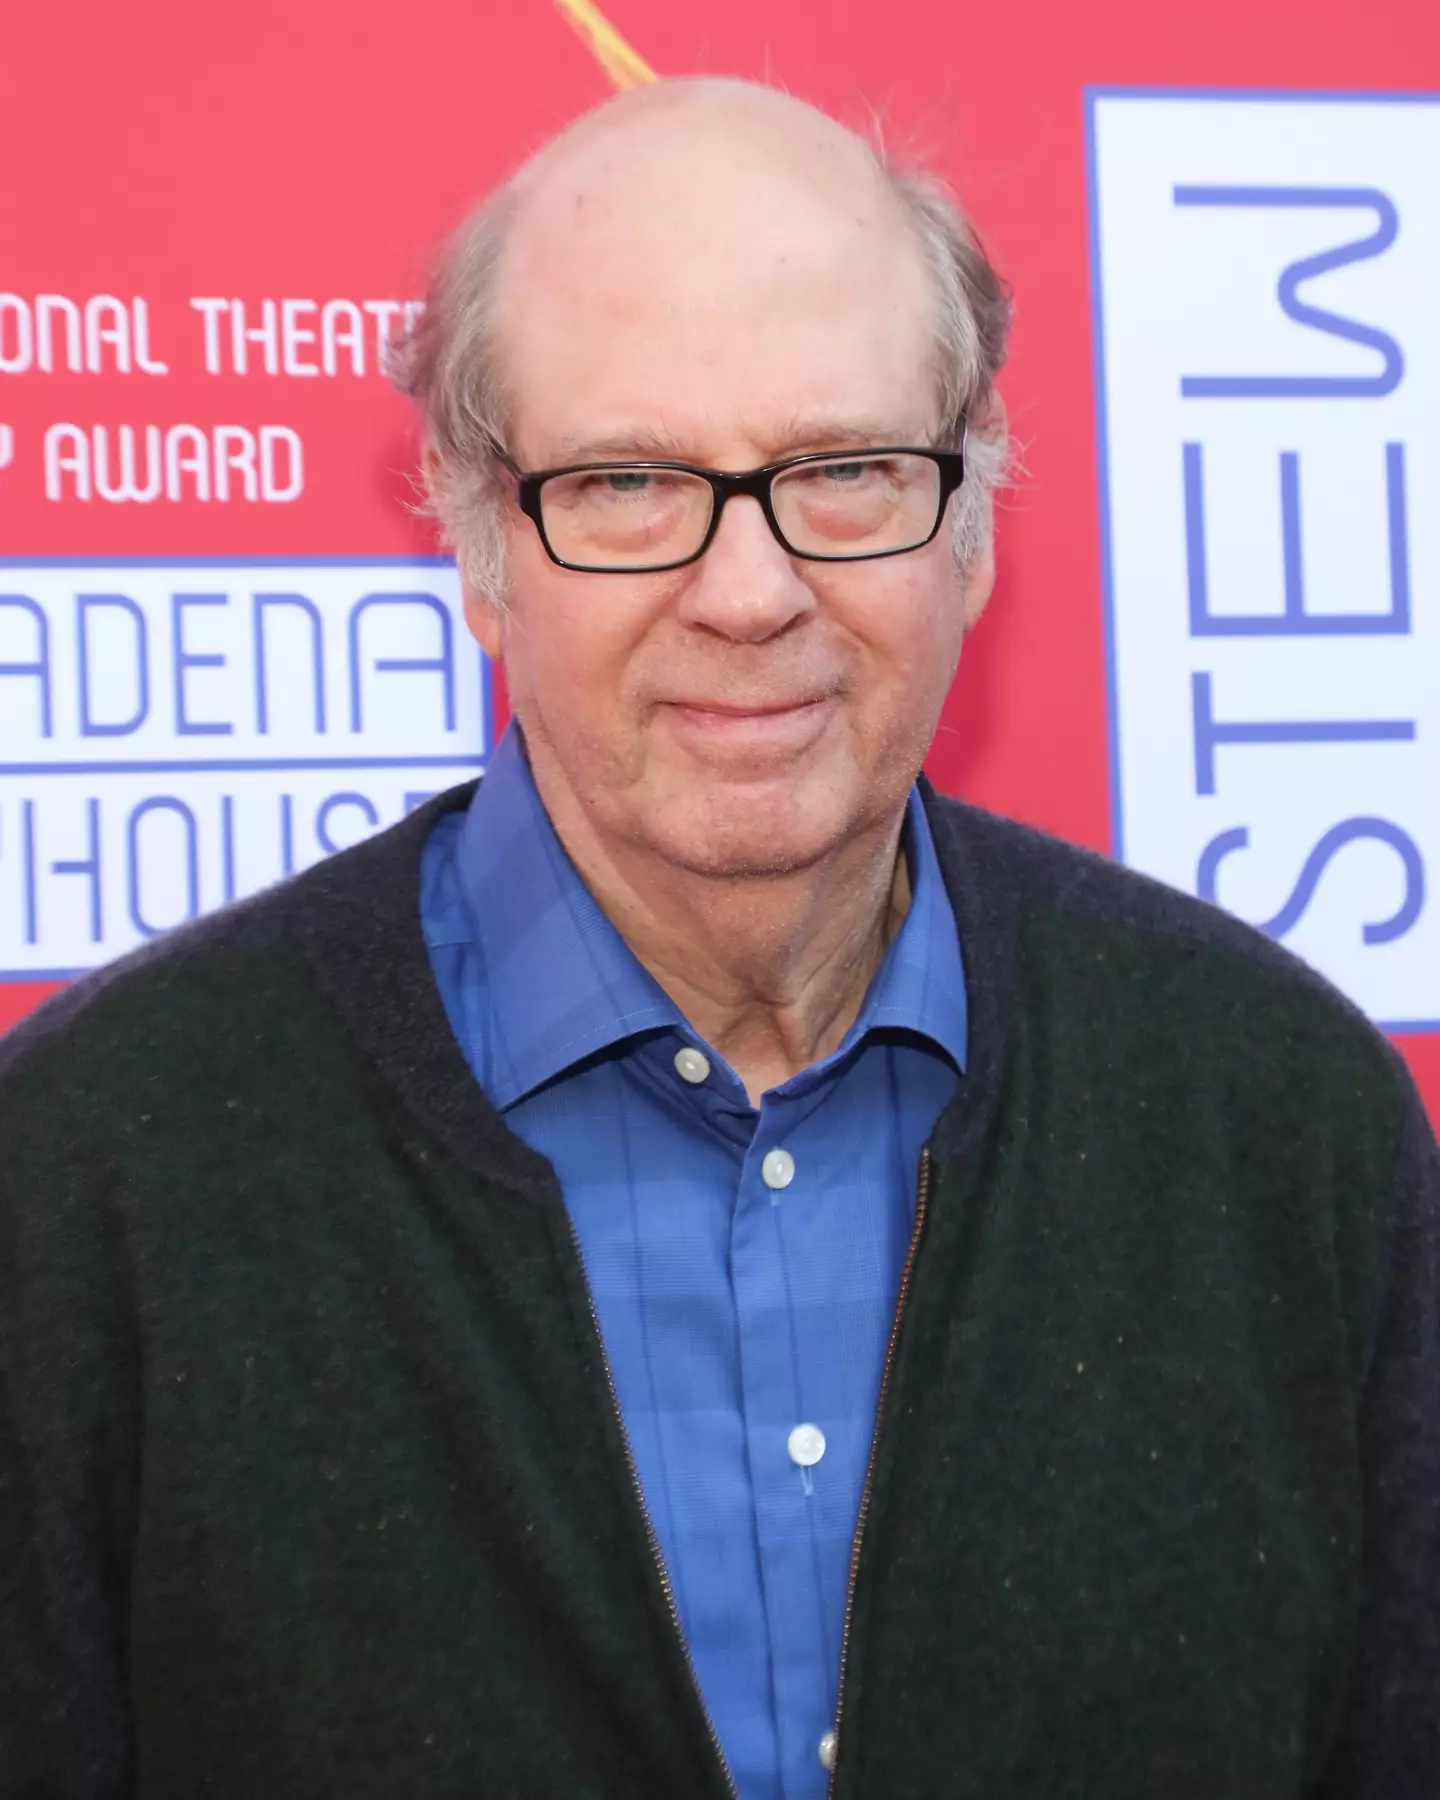 Tobolowsky claimed his own experience with the condition helped him with the role.